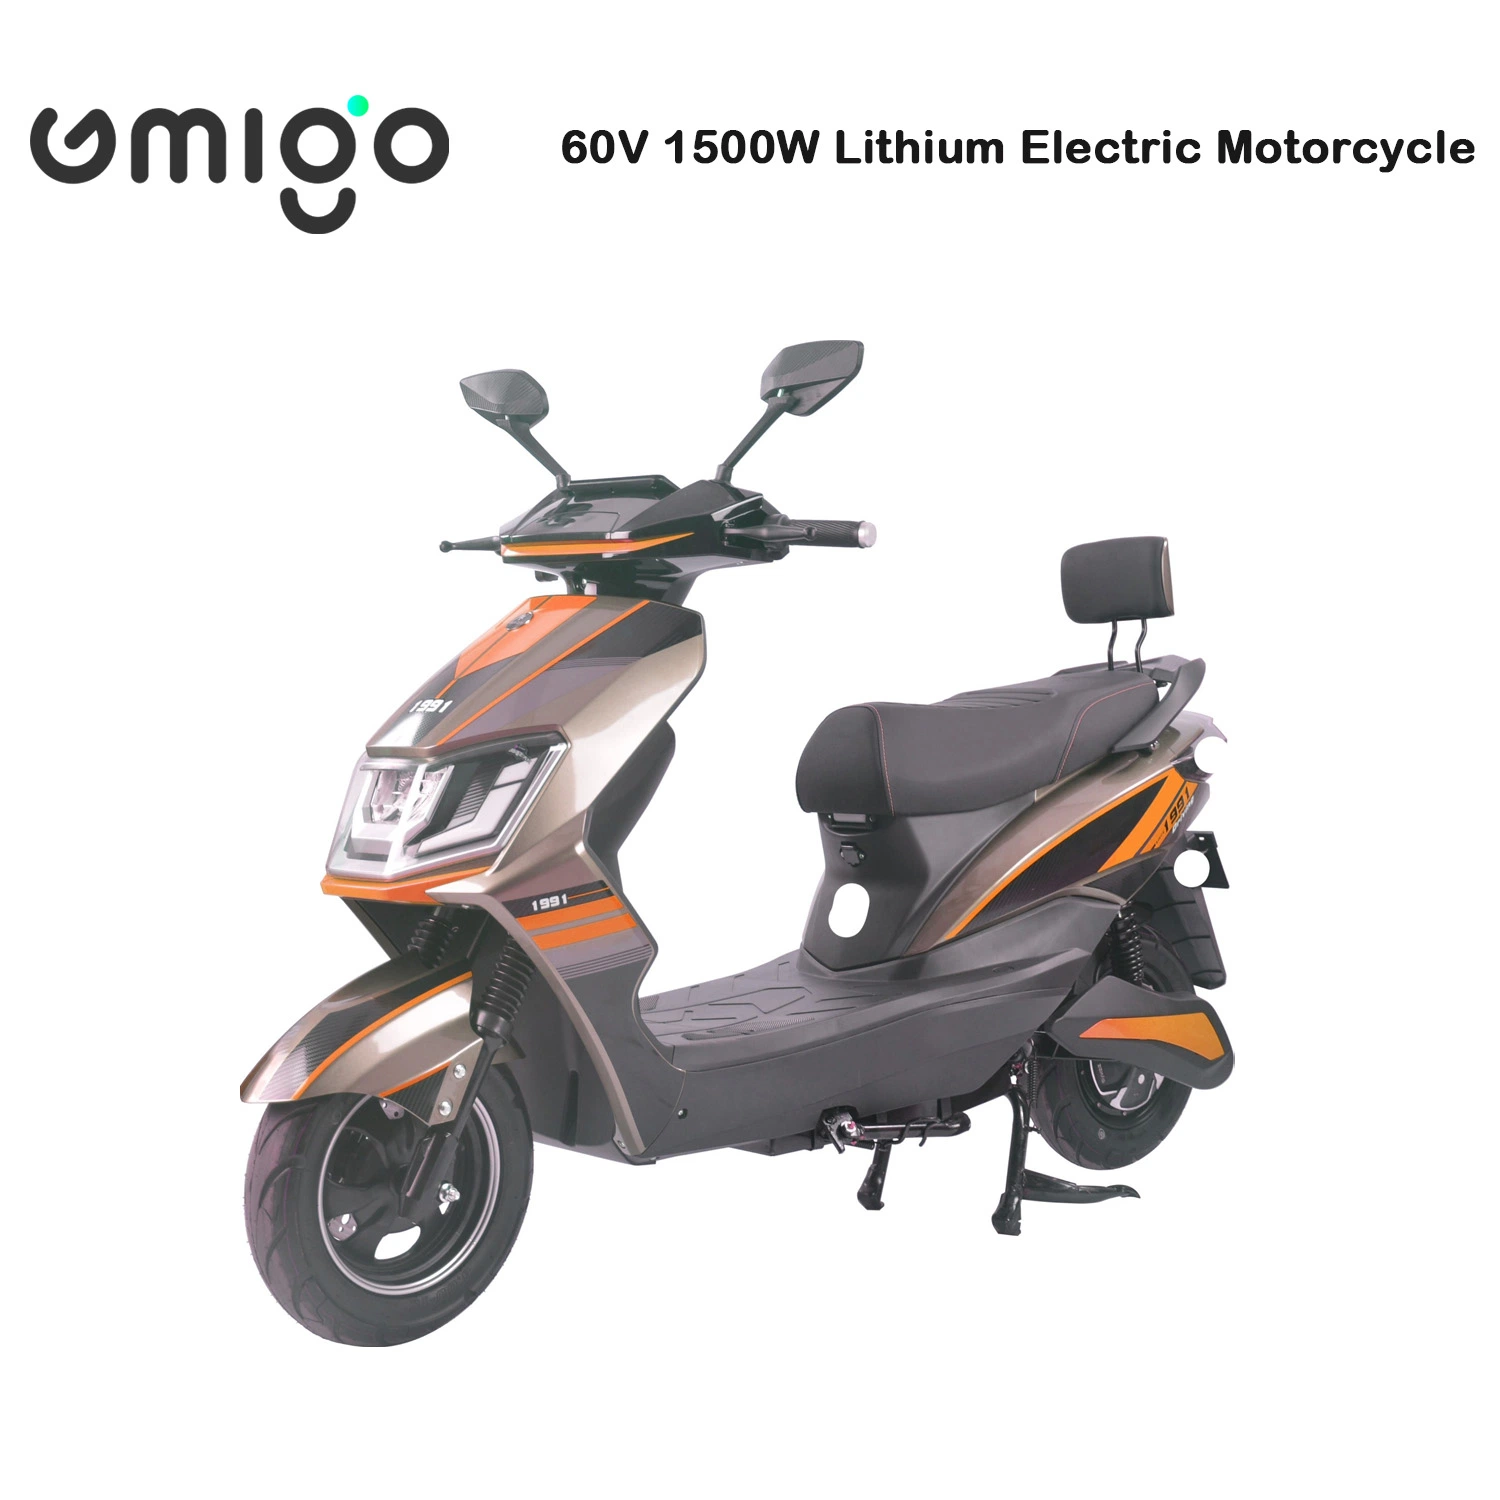 41km/H Max Speed 72V 32ah Big Lead-Acid Battery Electric Motorcycle